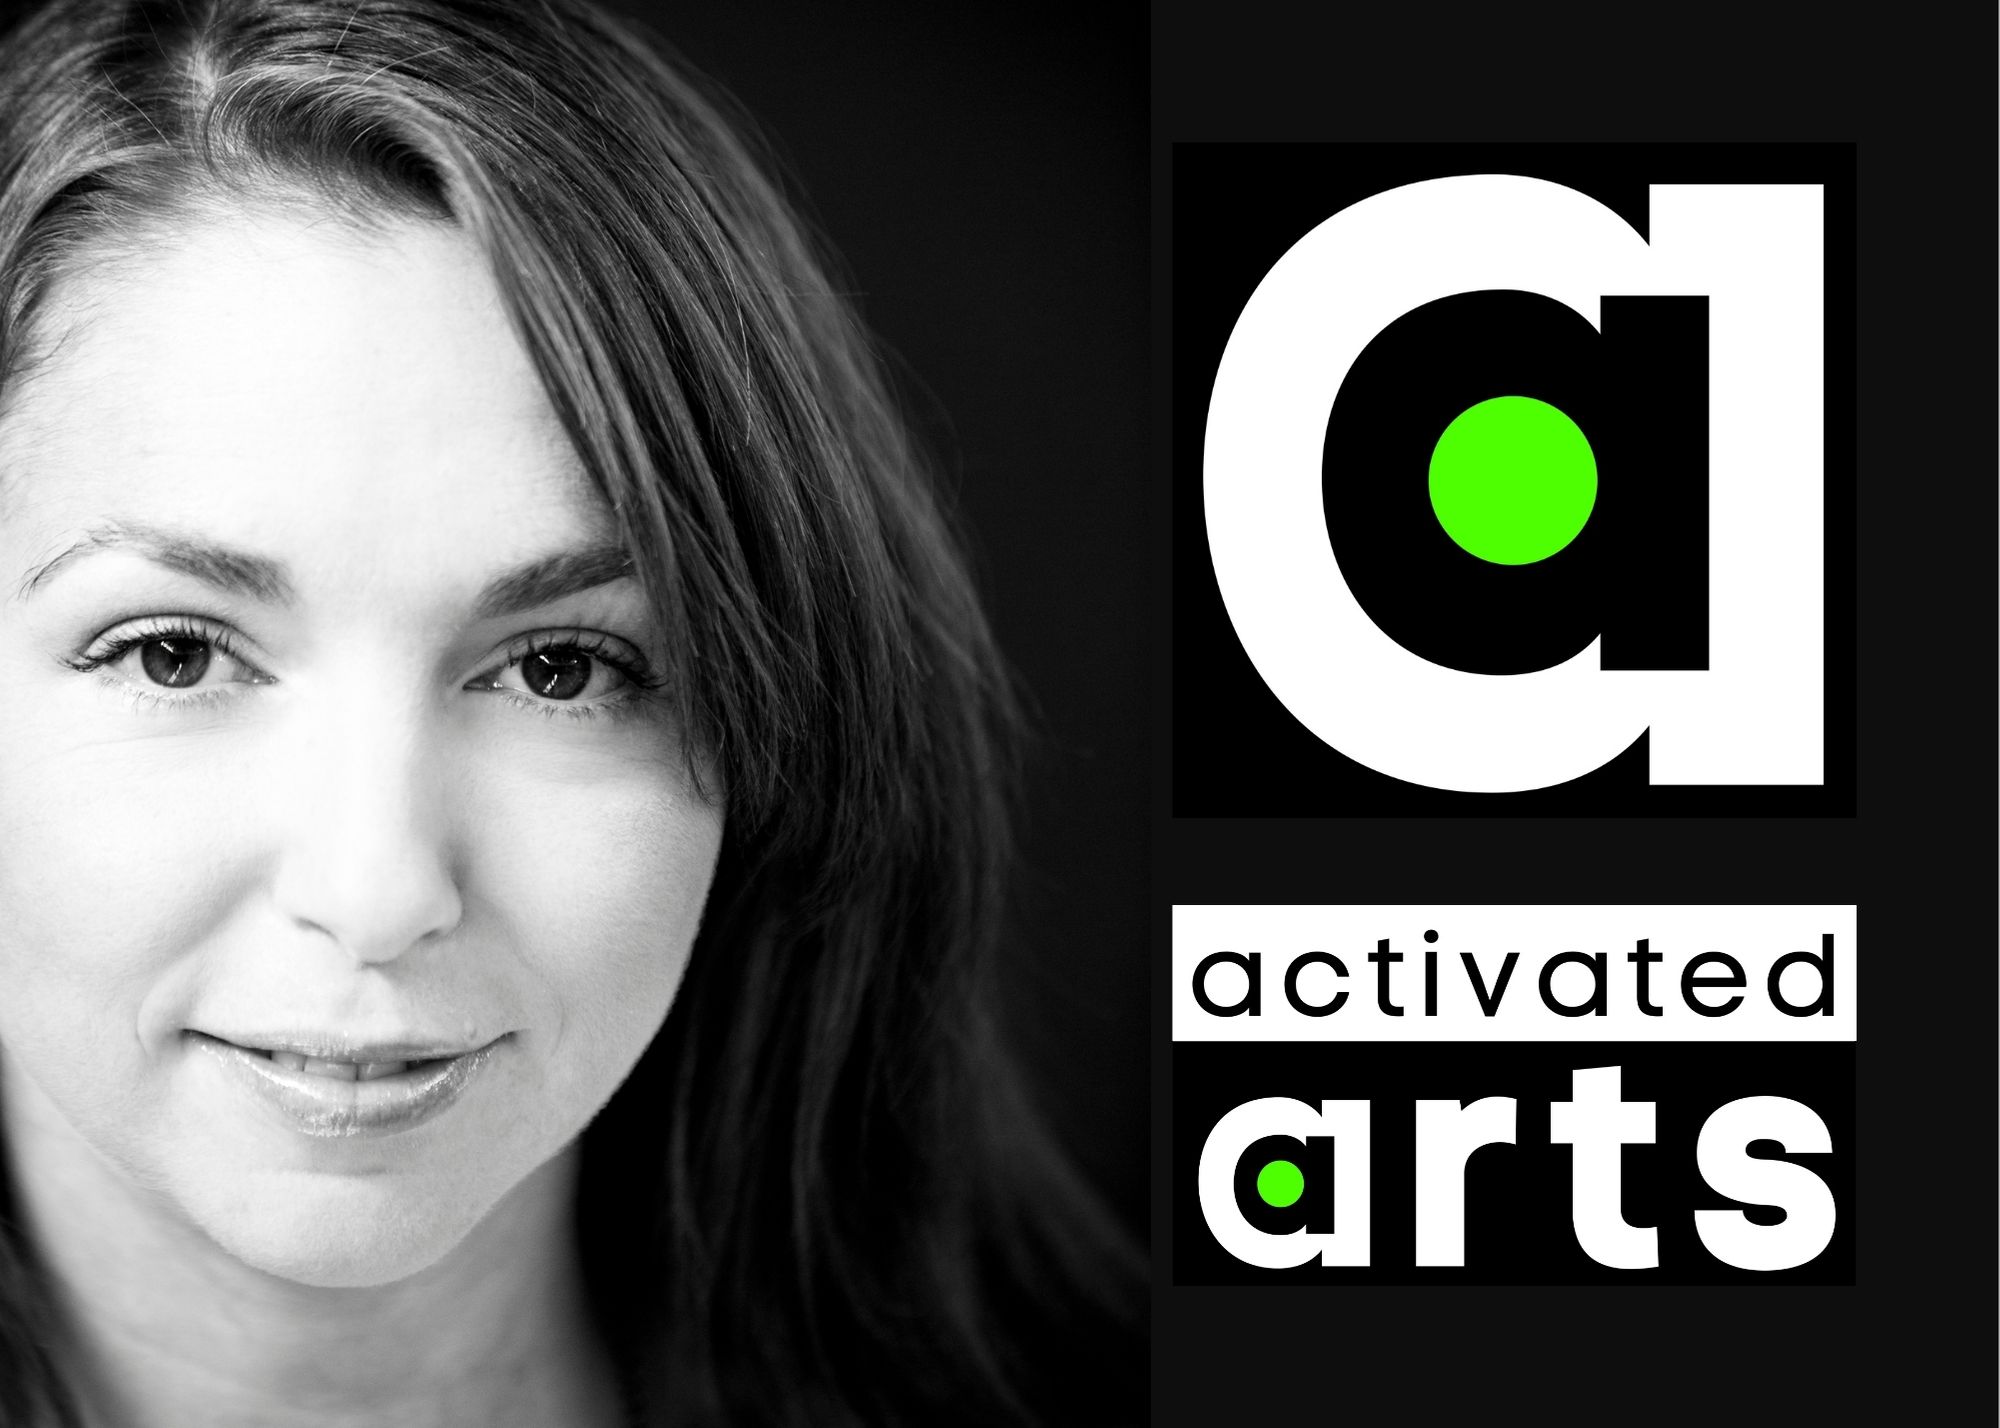 A headshot of a Caucasian woman with long dark hair is on the left. On the right is a black lowercase a inside a larger white lowercase a. A lime green cirle is located within the lowercase black a.